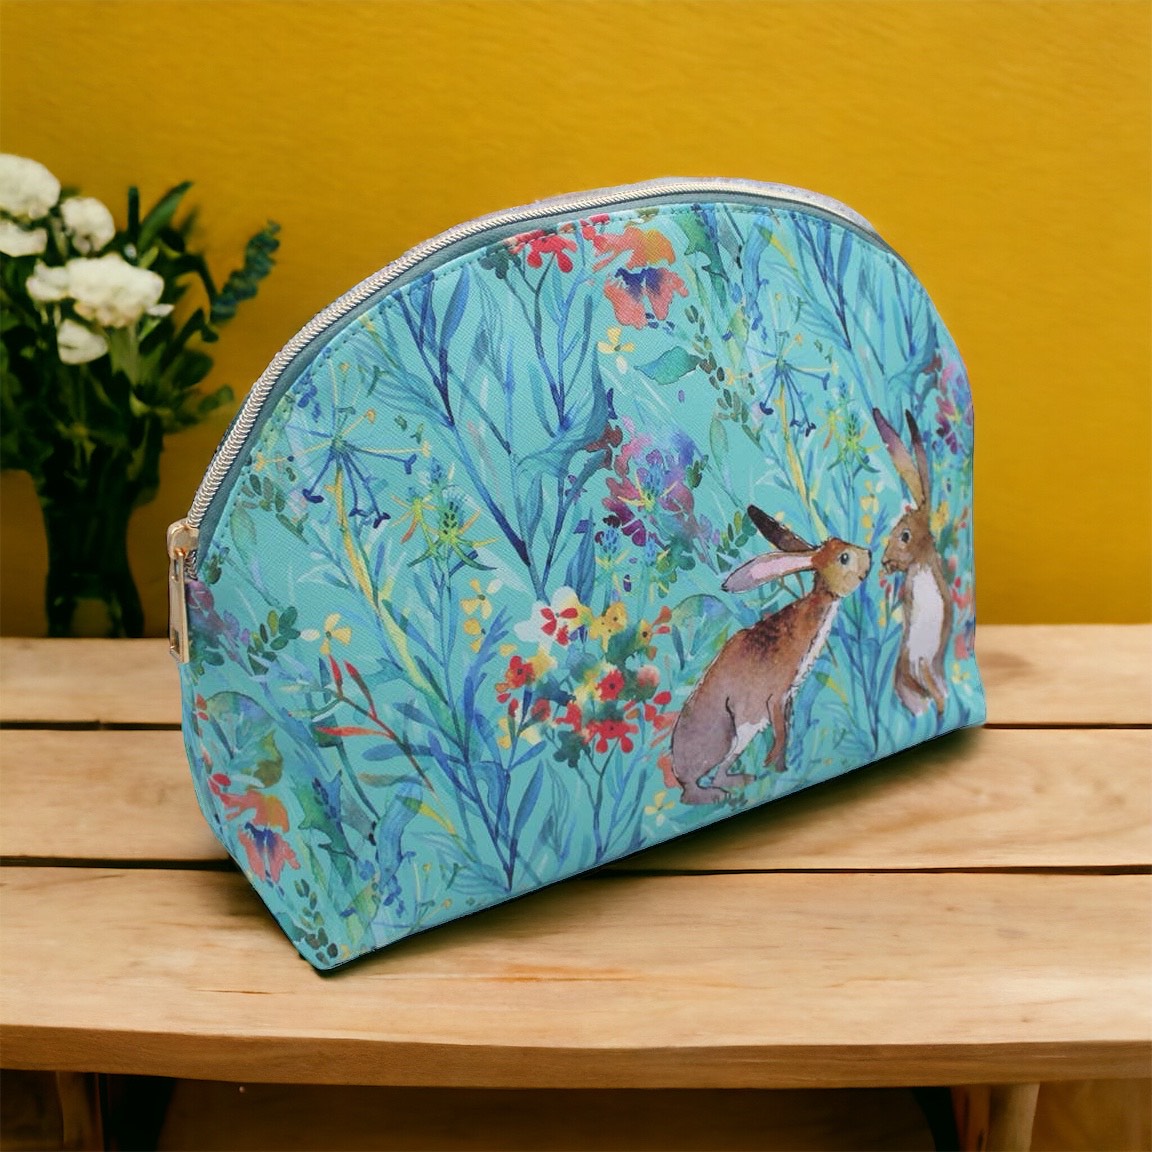 Kissing Hares Cosmetic Bag for Style on the Go